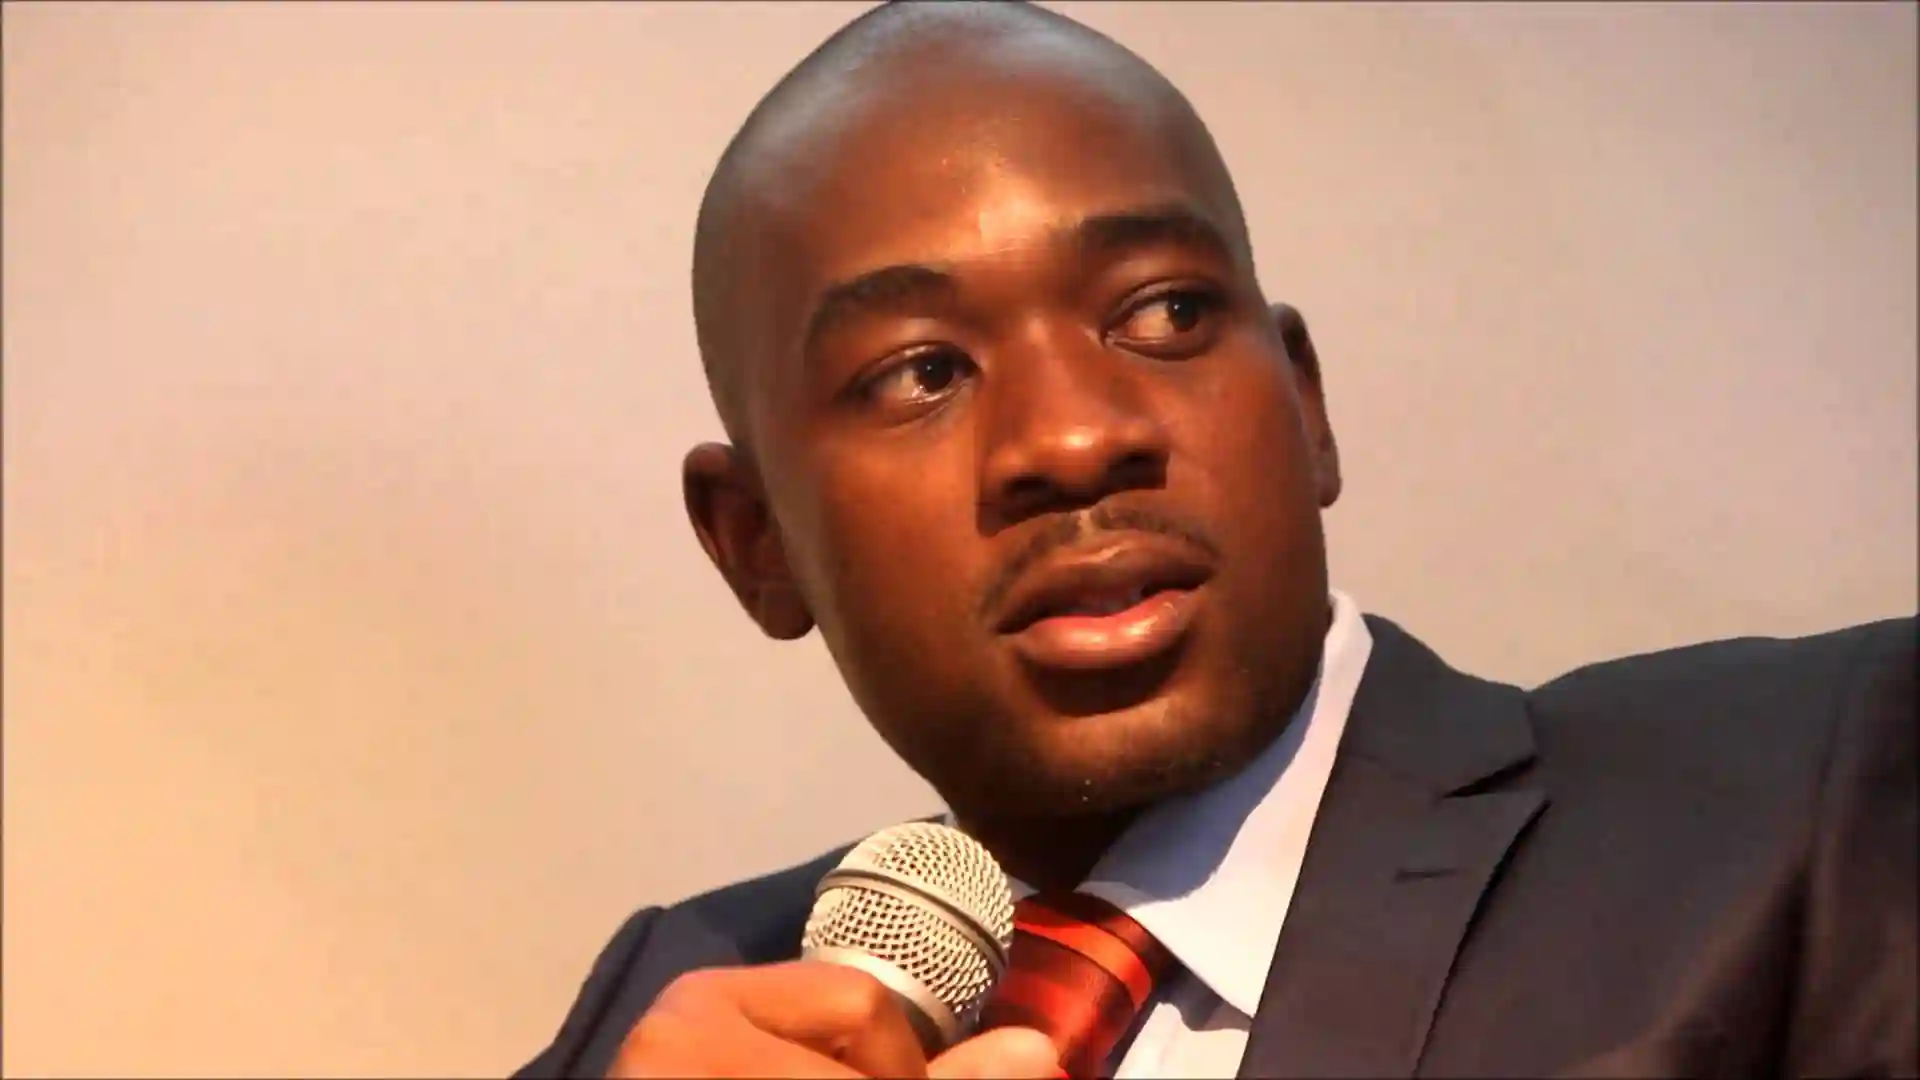 MDC Rubbishes Letter Claiming Chamisa Has Formed A New Party